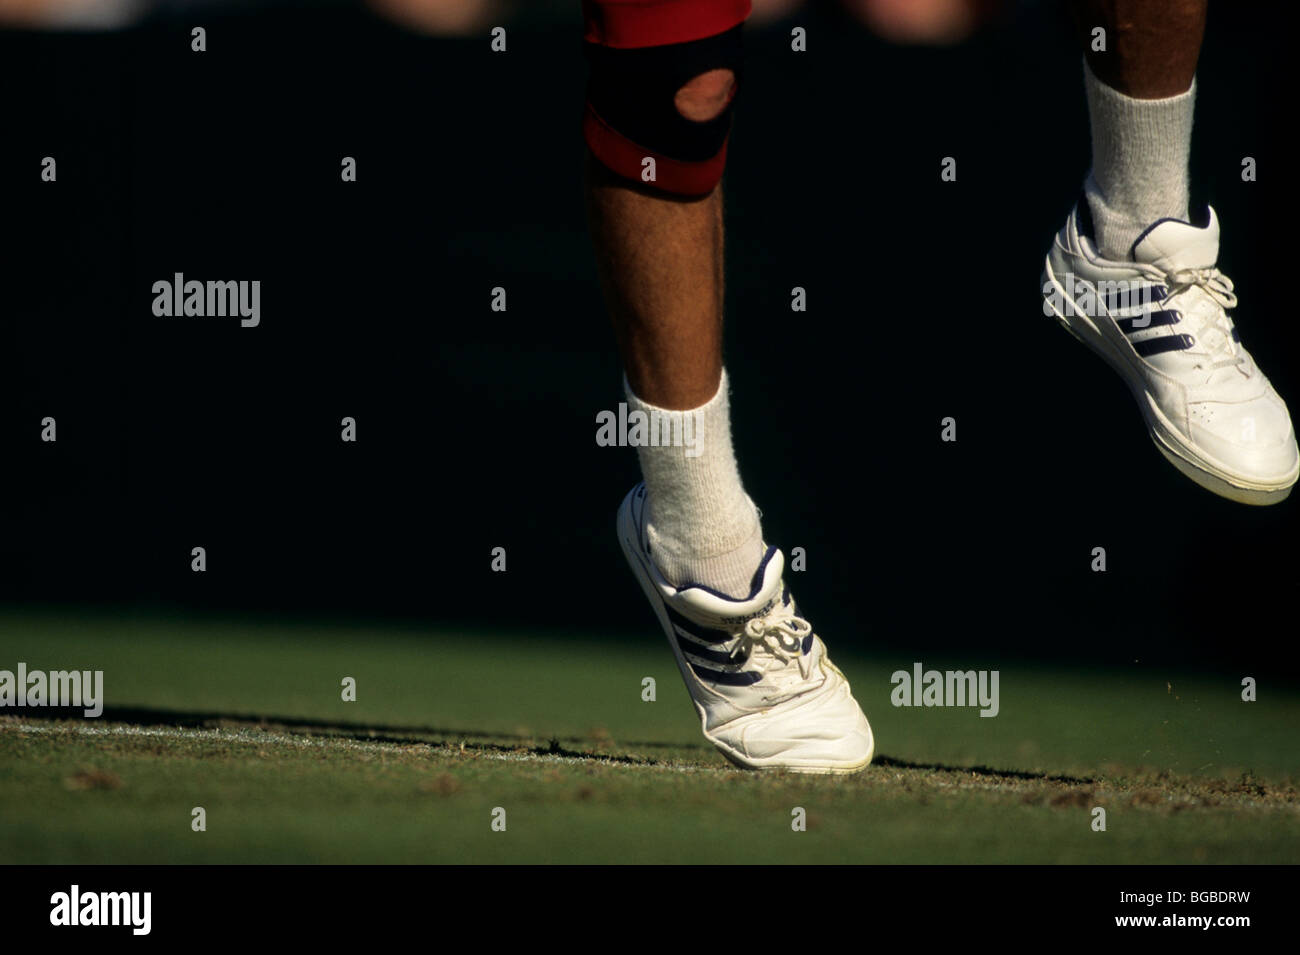 Tennis player wearing a knee brace serving a ball at the service line Stock Photo